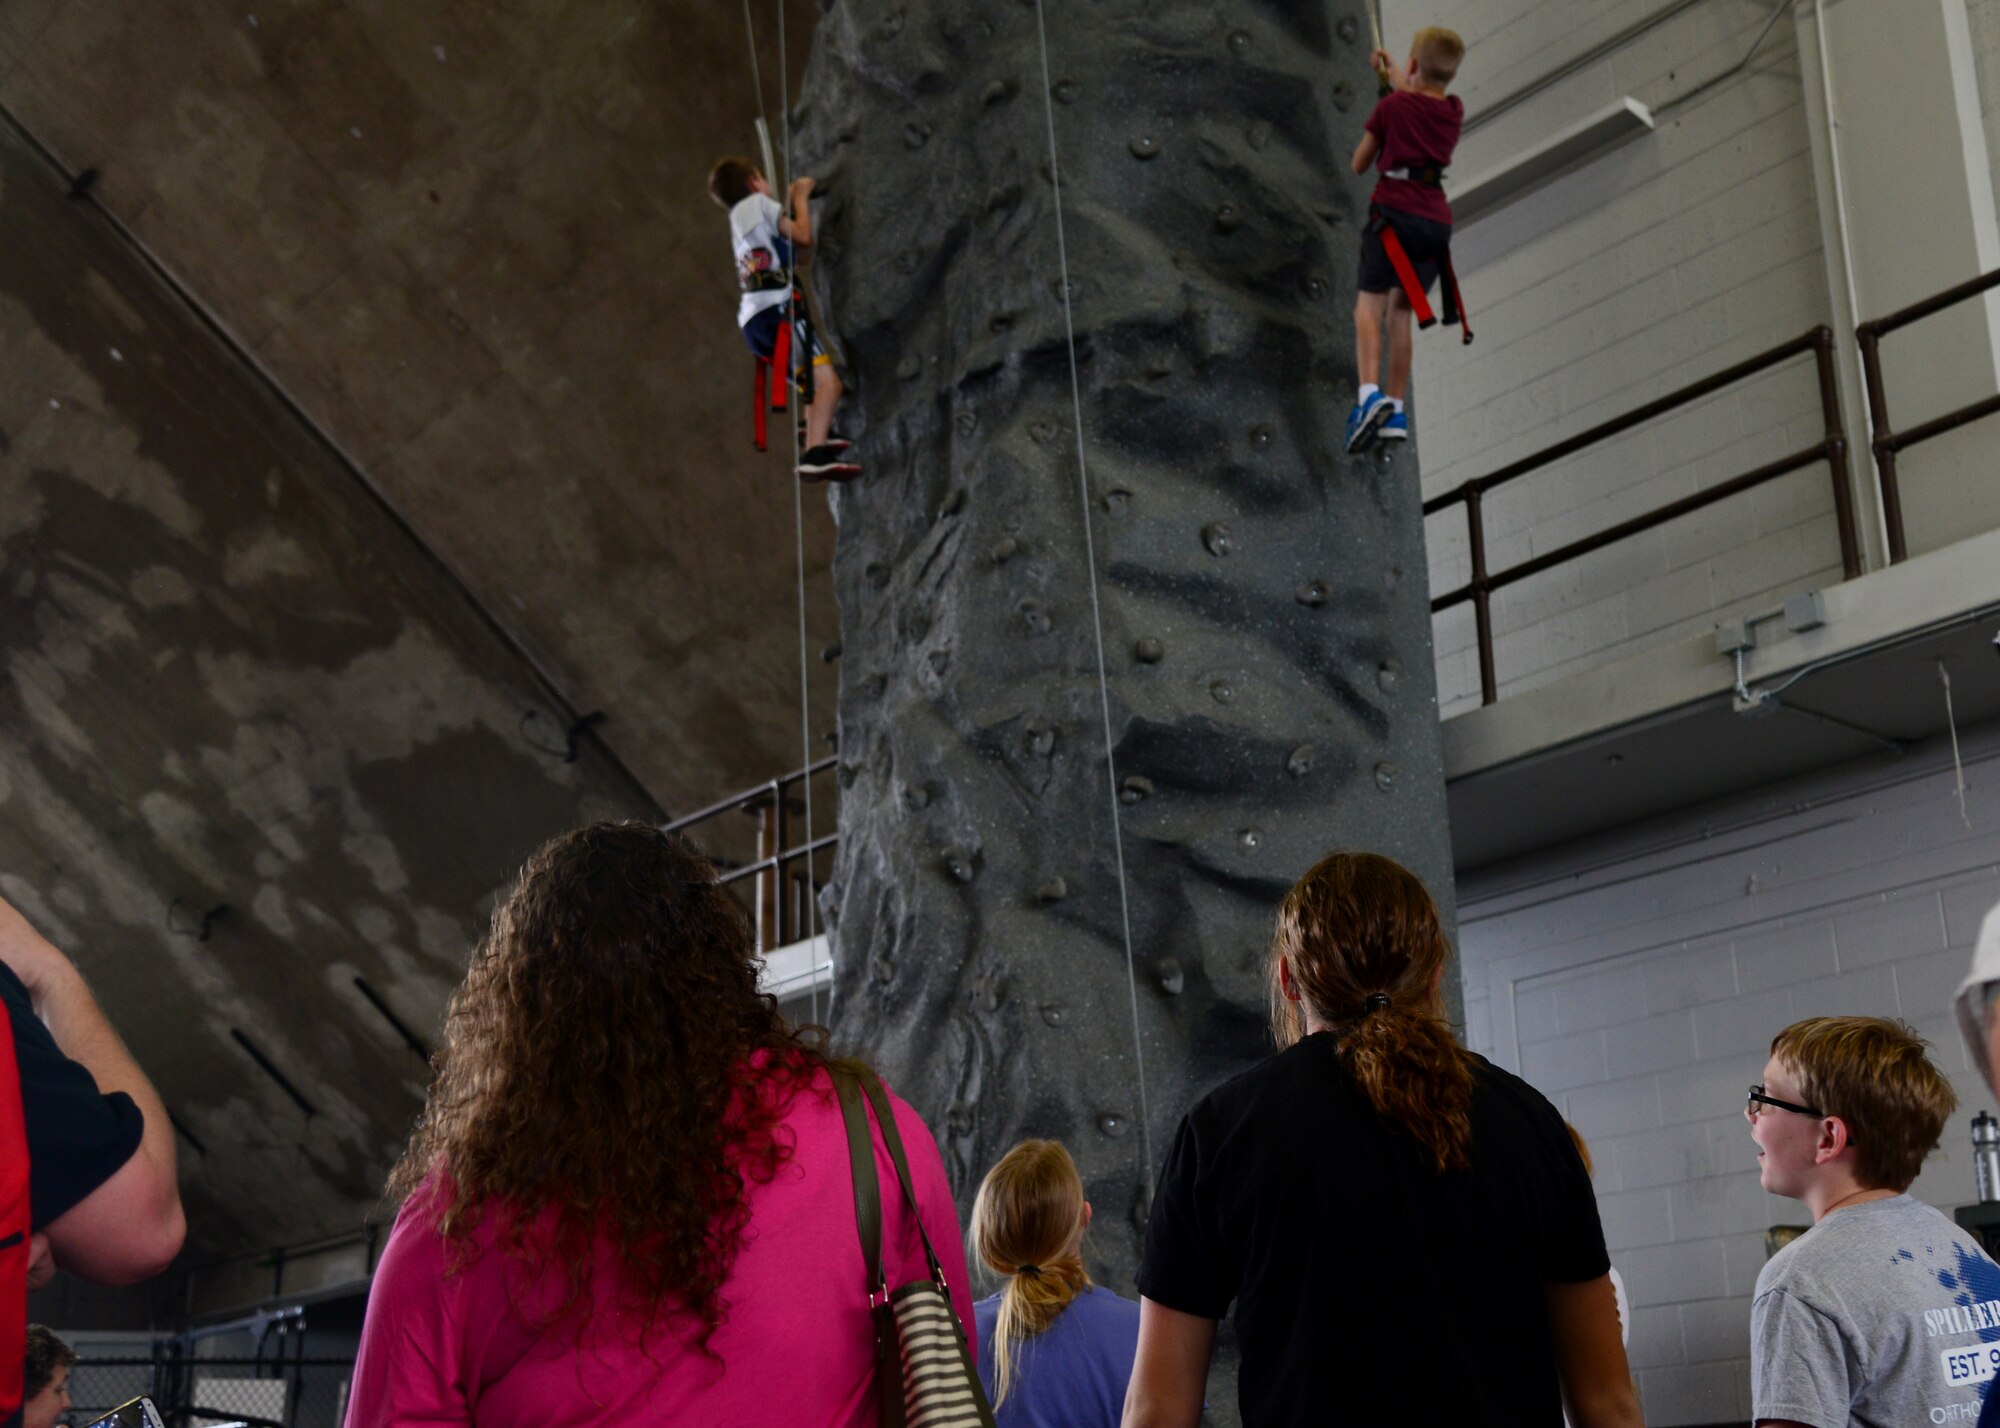 Parents and family members watch children climb up a rock wall inside the Pride Hangar on Ellsworth Air Force Base, South Dakota during the Back-to-School Roundup, August 18, 2018. More than 500 families were given free backpacks and school supplies, all of which were provided by Operation Homefront, a non-profit that provides for military families. (U.S. Air Force photo by Senior Airman Denise M. Jenson)